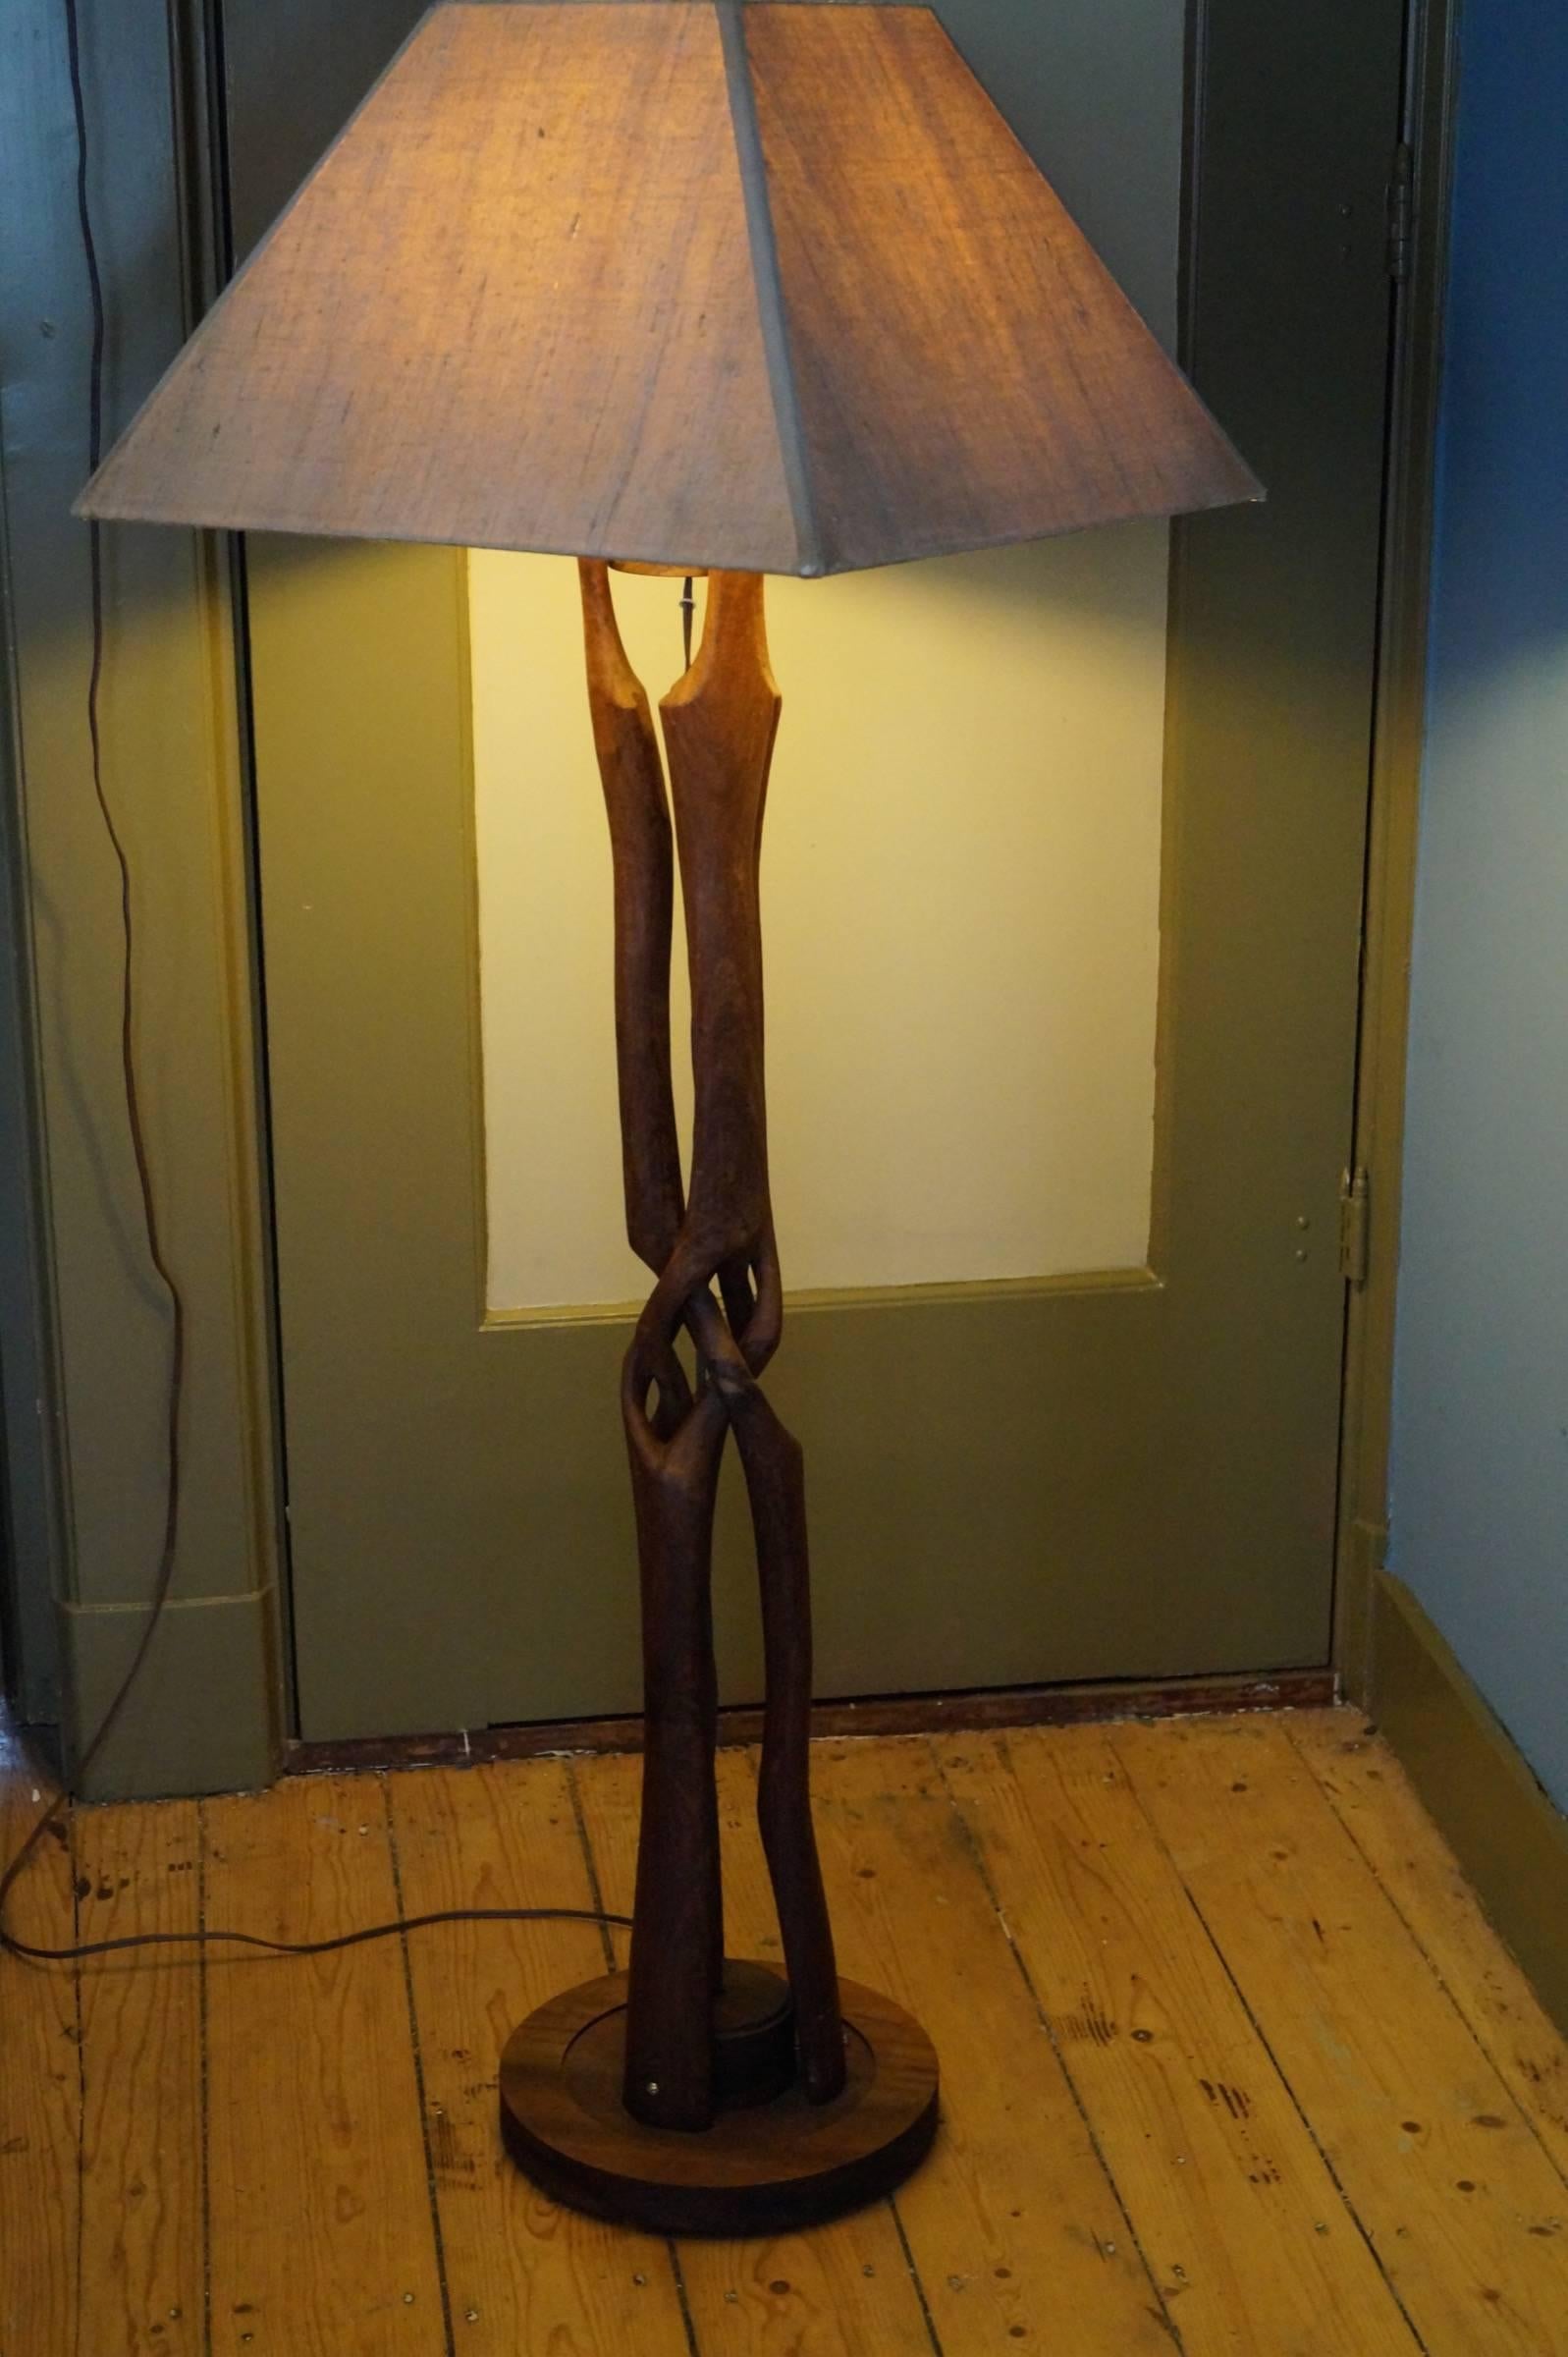 A never seen Scandinavian floor lamp with a unique entwined wooden leg.
Good vintage condition.

Height 135cm